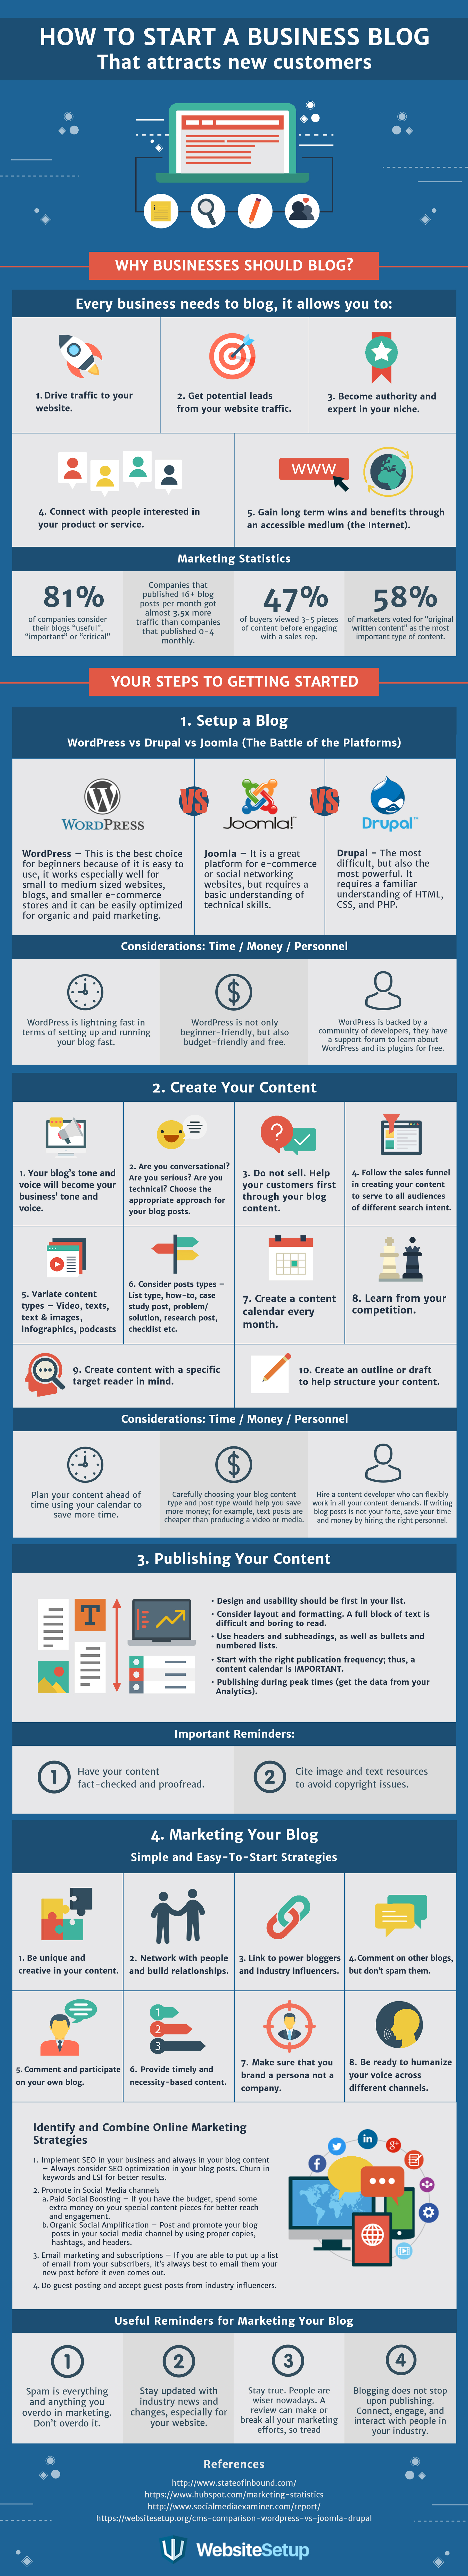 How To Start a Business Blog [Infographic]